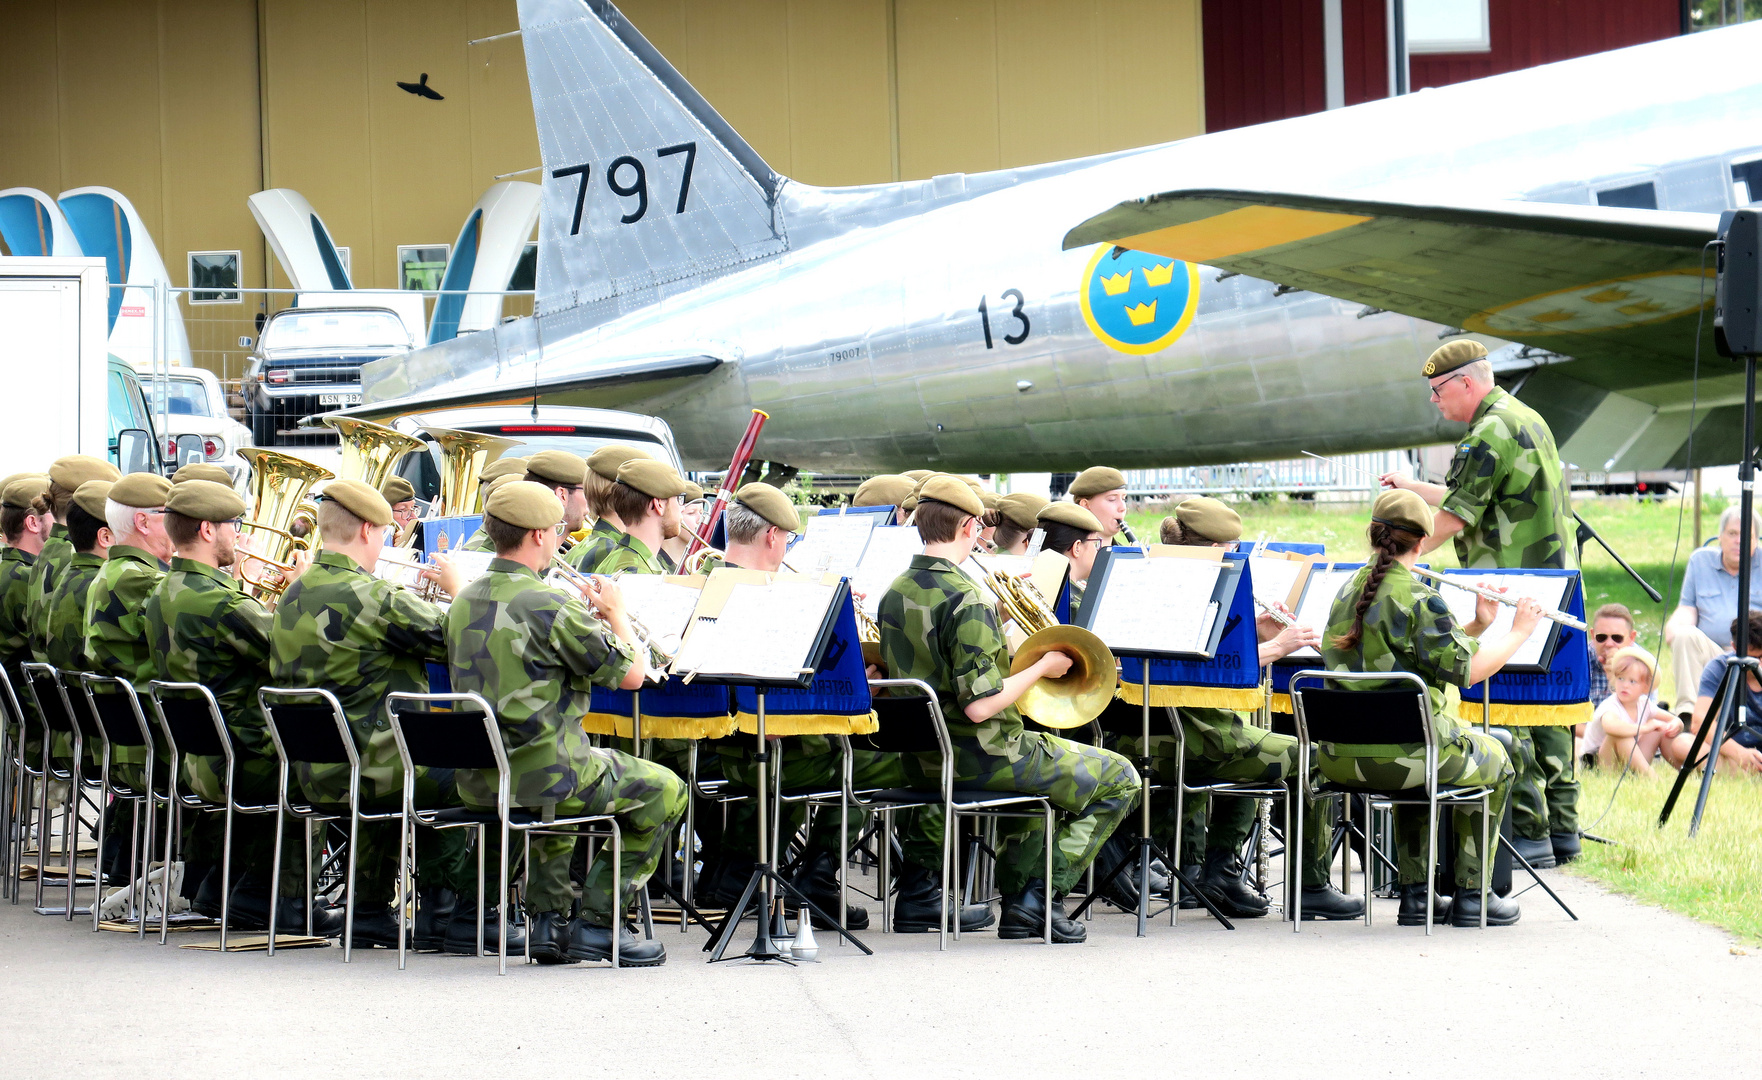 Musik Corps Flygvappenmuseum.................